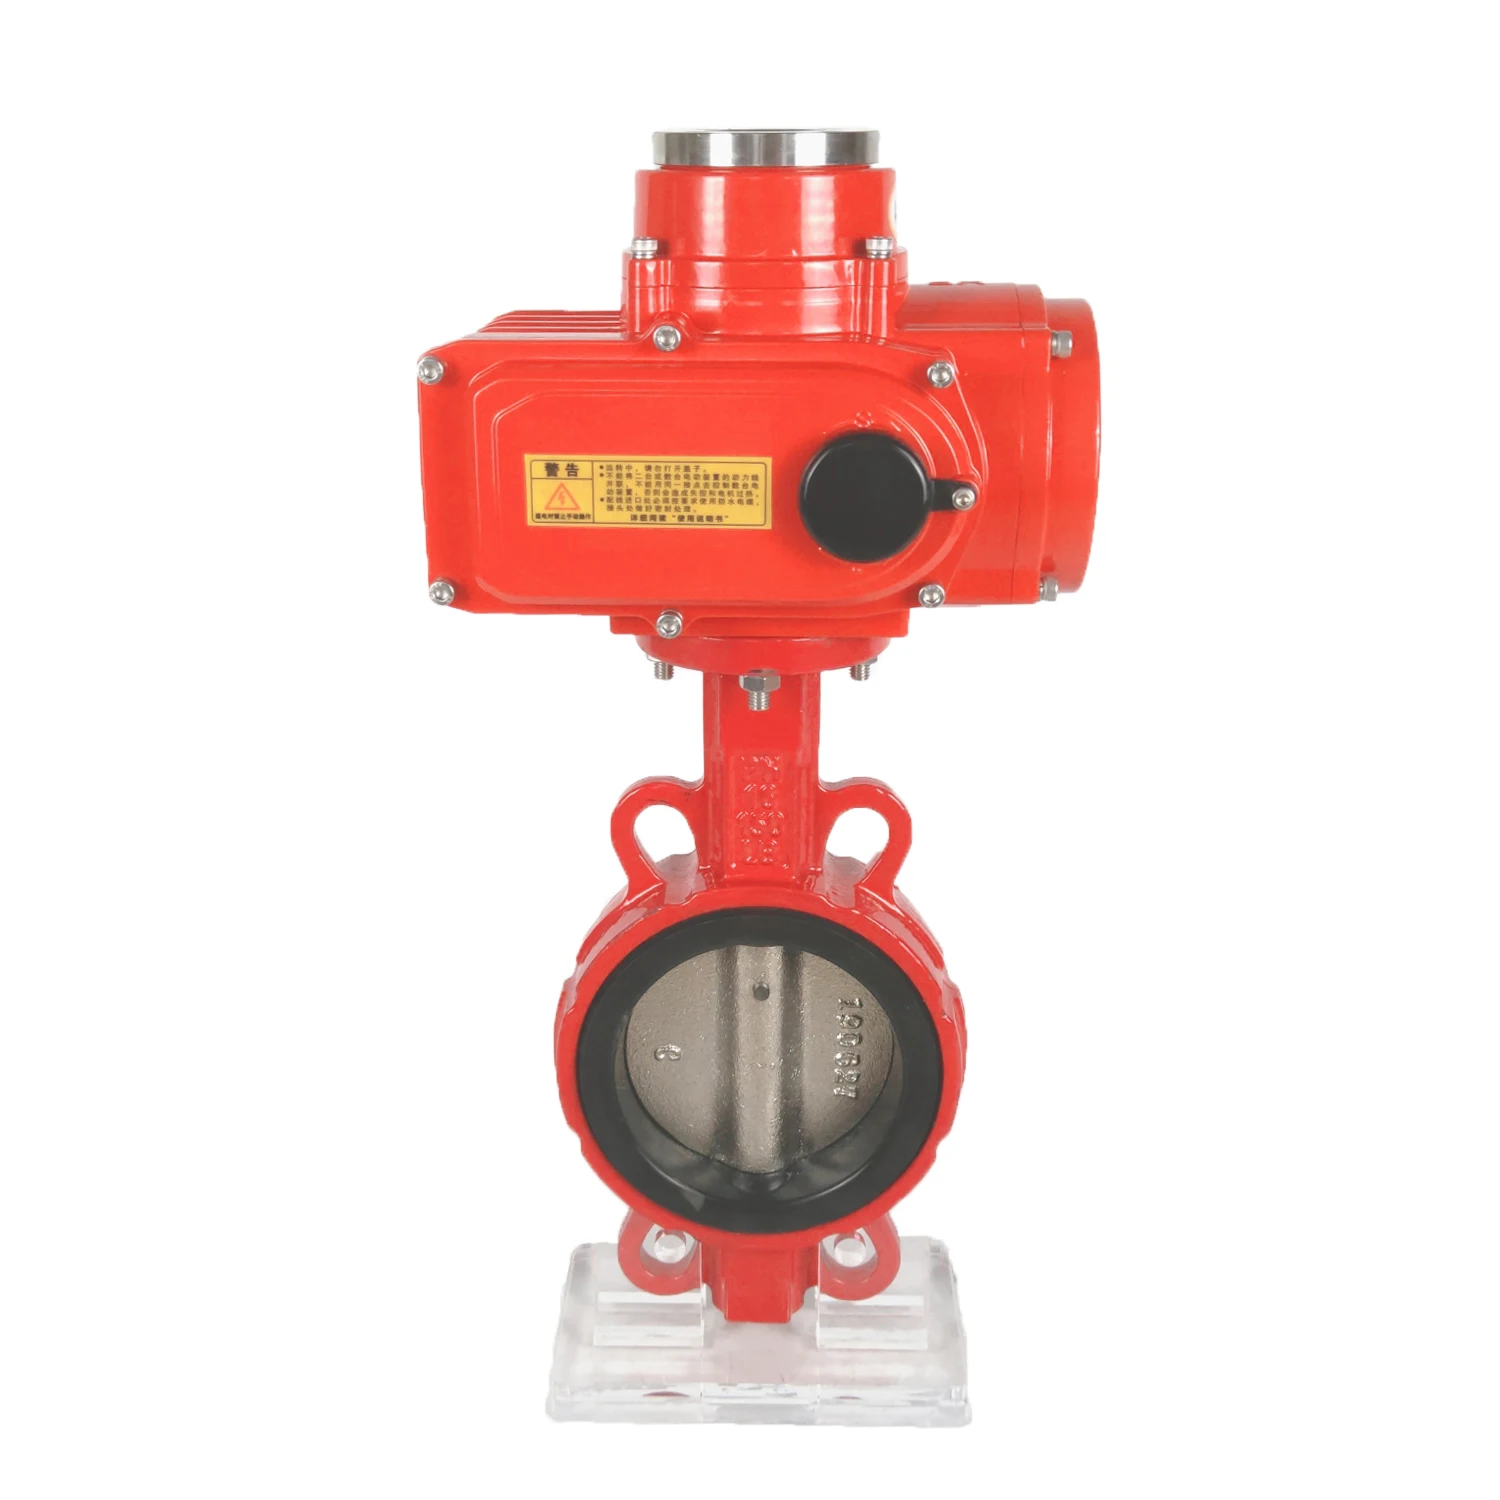 
Electric actuator explosion proof stainless steel butterfly valve dn200 price list  (62293358814)